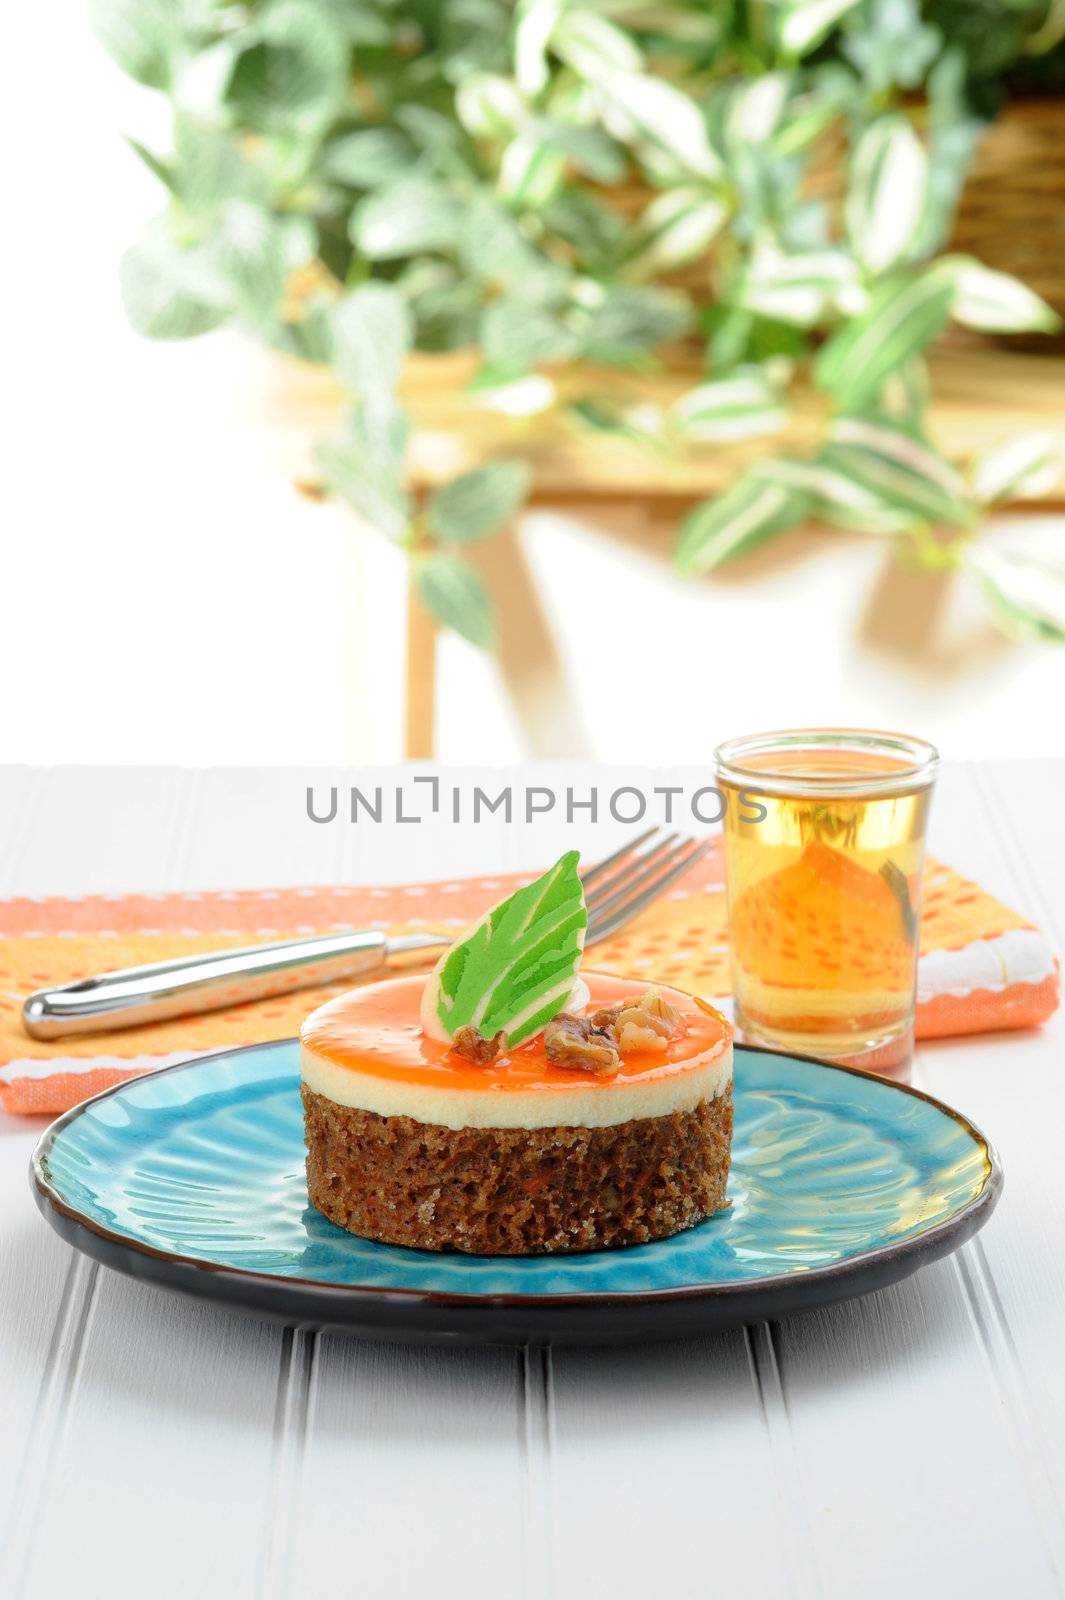 An individual serving of carrot cake on a blue plate.